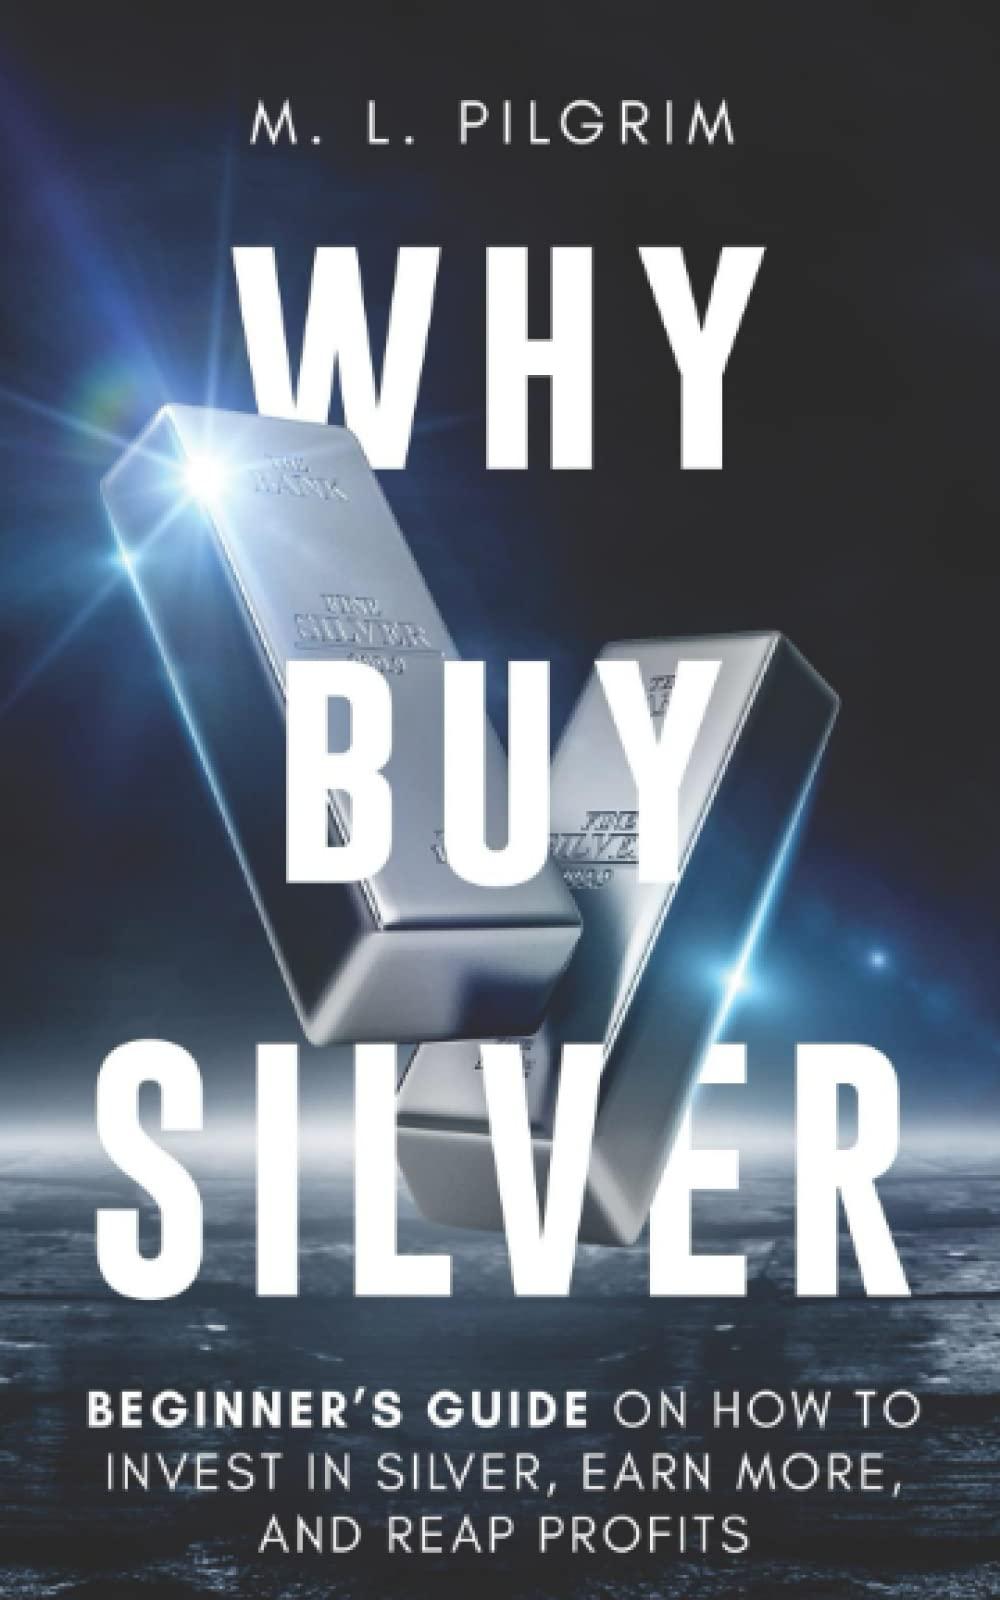 why buy silver beginners guide on how to invest in silver earn more and reap profits 1st edition m. l.